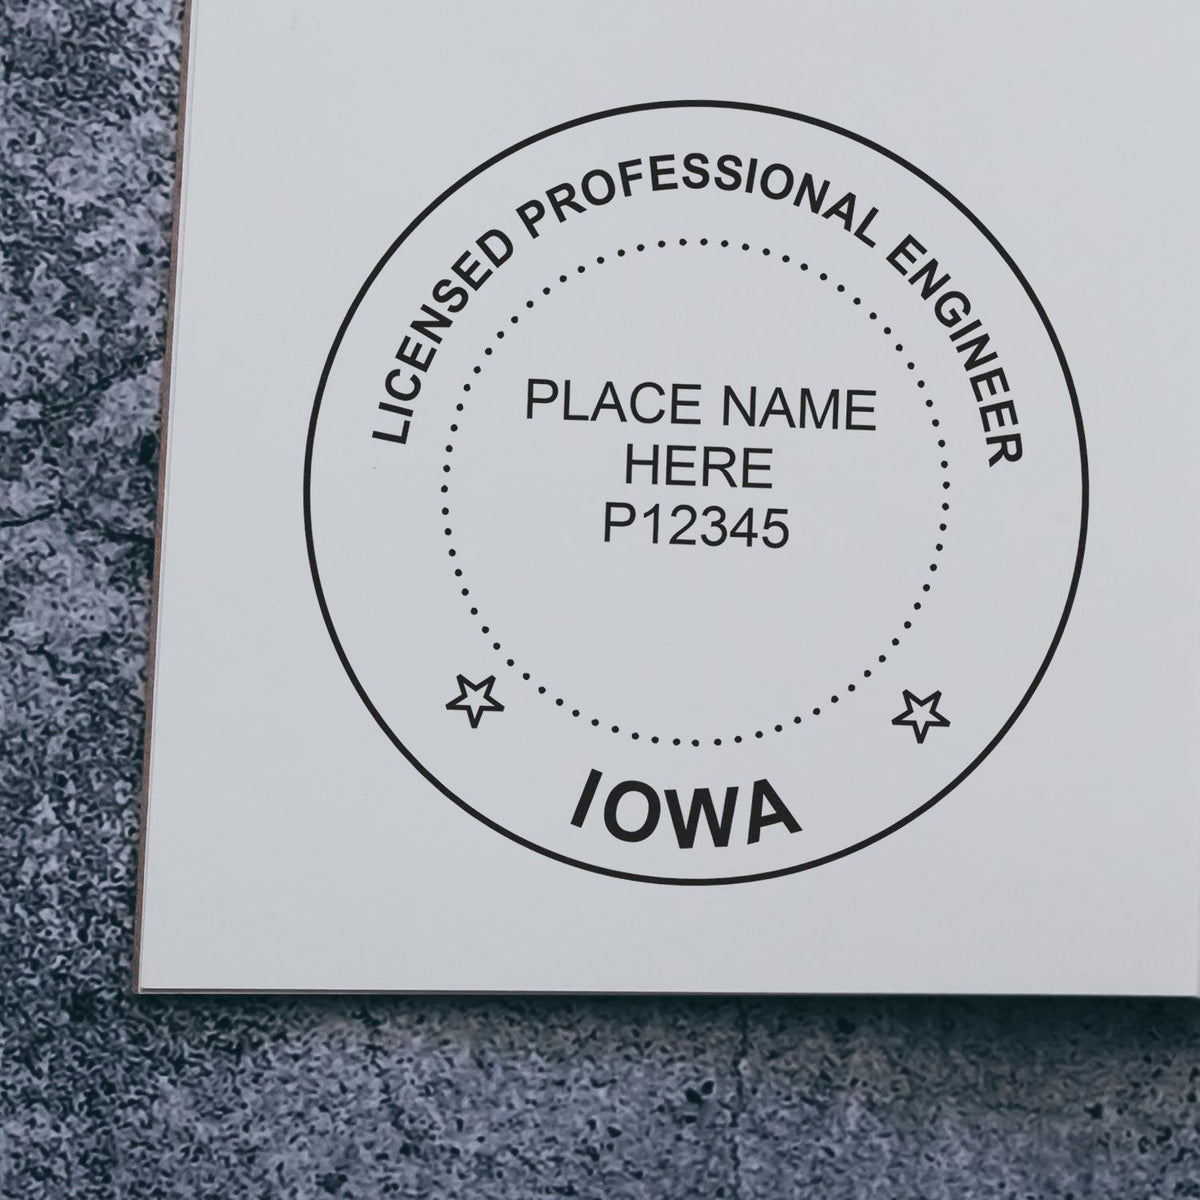 This paper is stamped with a sample imprint of the Iowa Professional Engineer Seal Stamp, signifying its quality and reliability.